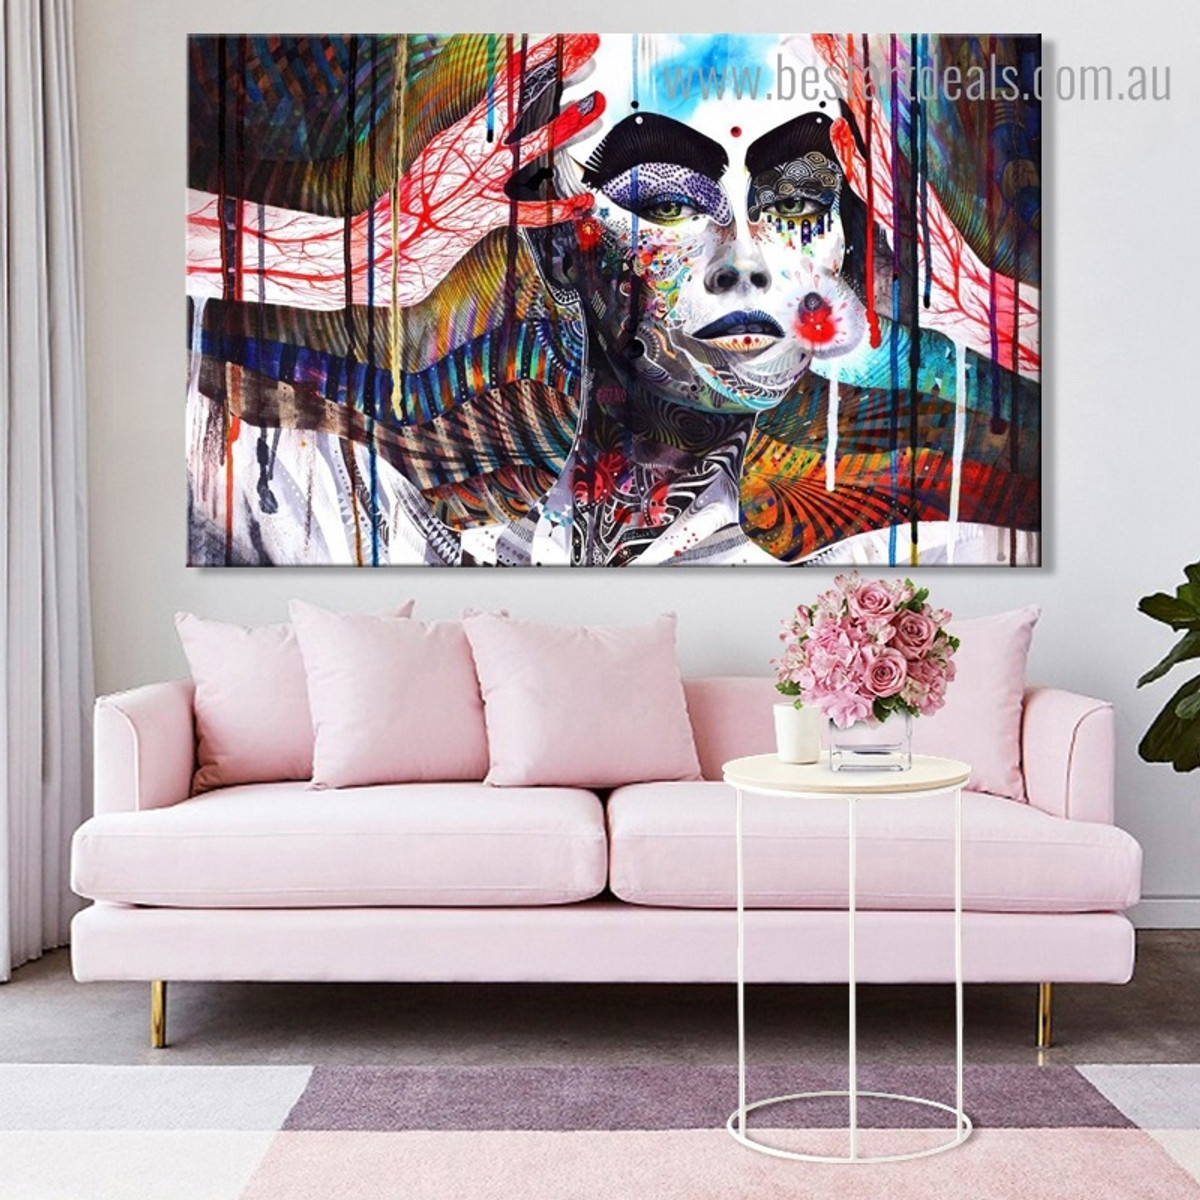 Buy Colorful Witch Canvas Print Wall Art Decor.